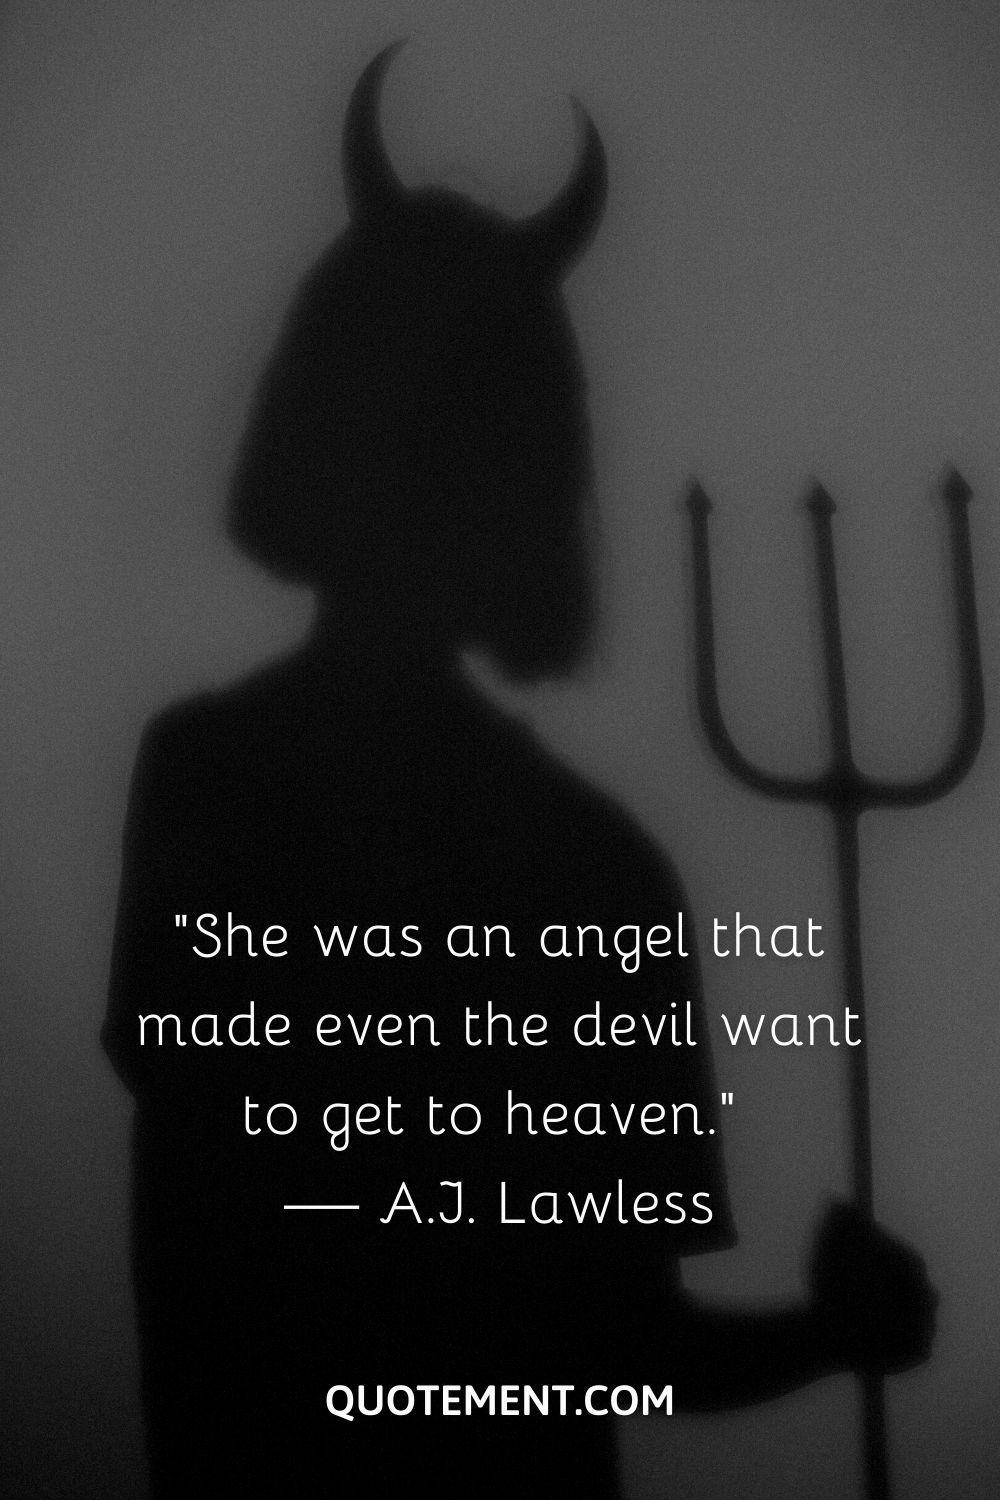 She was an angel that made even the devil want to get to heaven. — A.J. Lawless